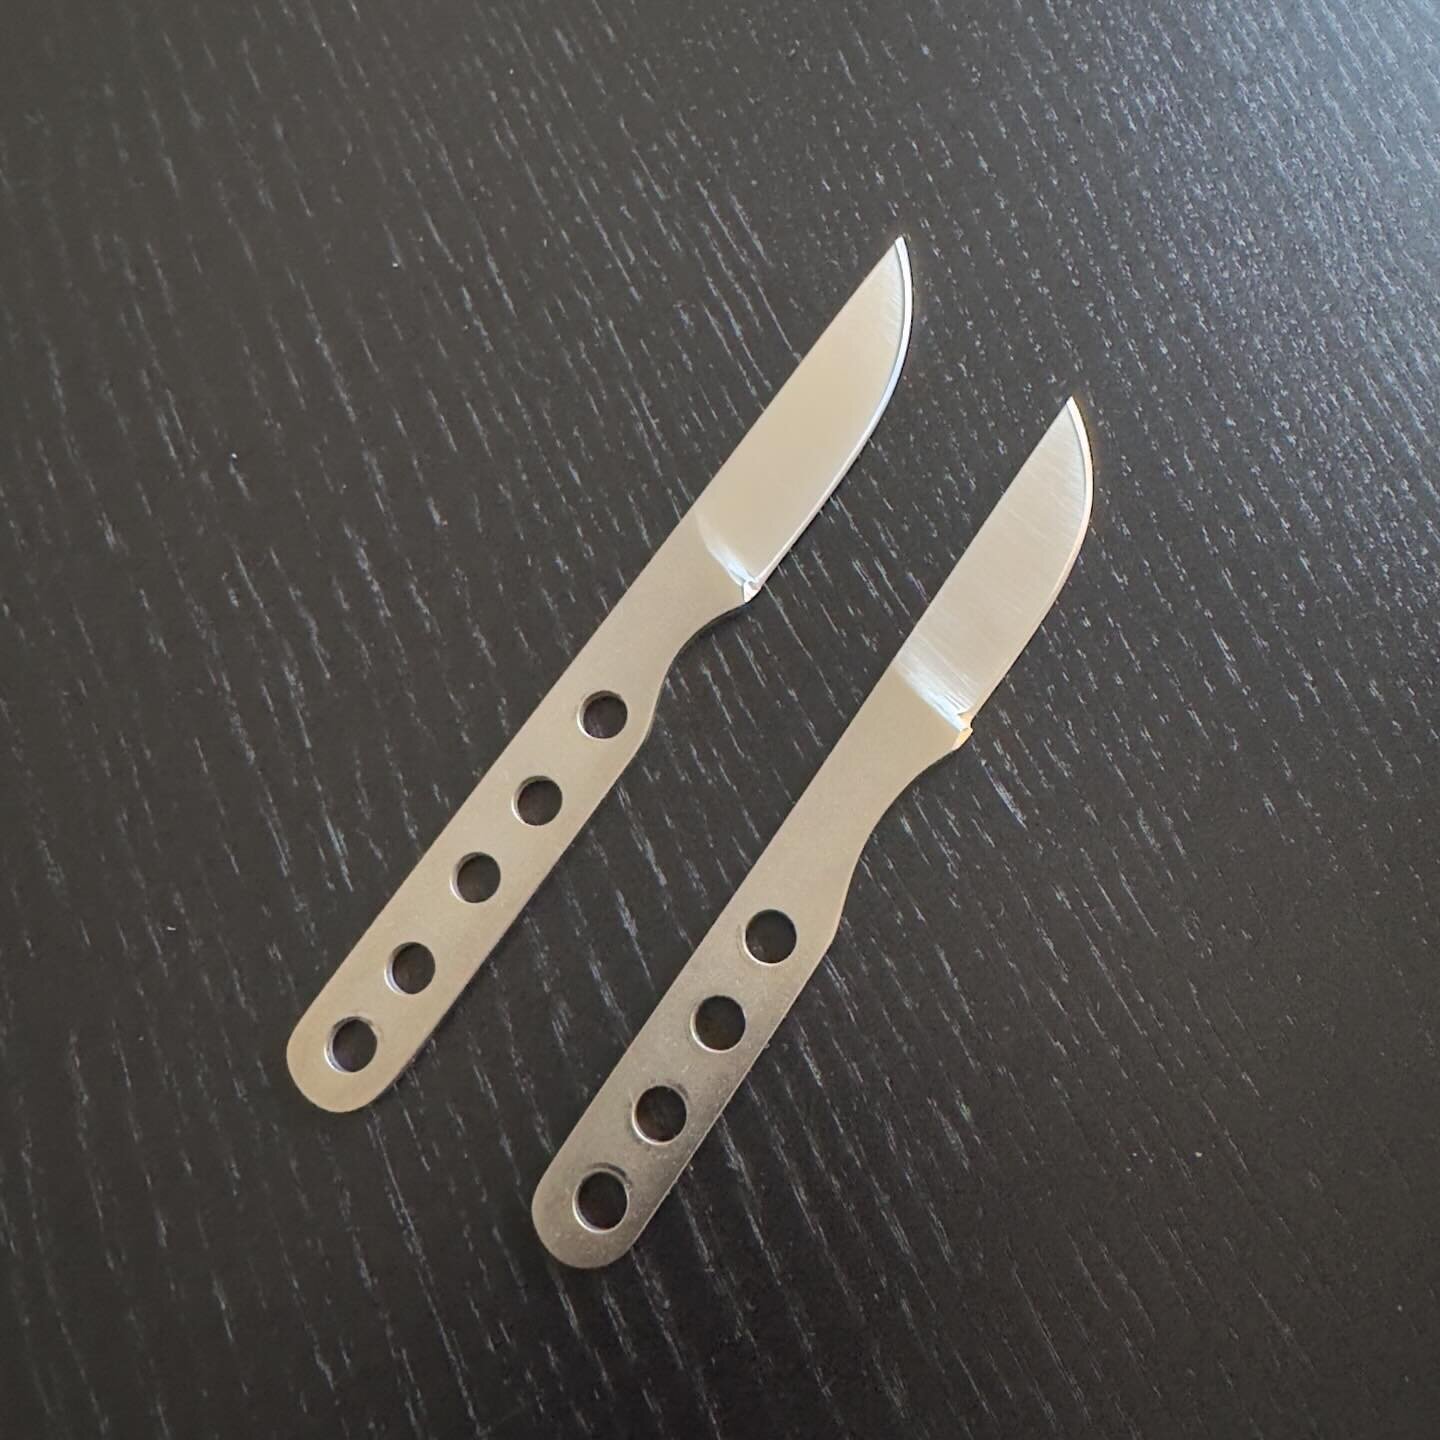 The RZR! Couple of small but tough edc knives. Both in S90v. One 5.5&rdquo; long and the second 5&rdquo; long. Both are 0.5&rdquo; wide. Perfect blades to put in your pocket and forget they&rsquo;re even there.